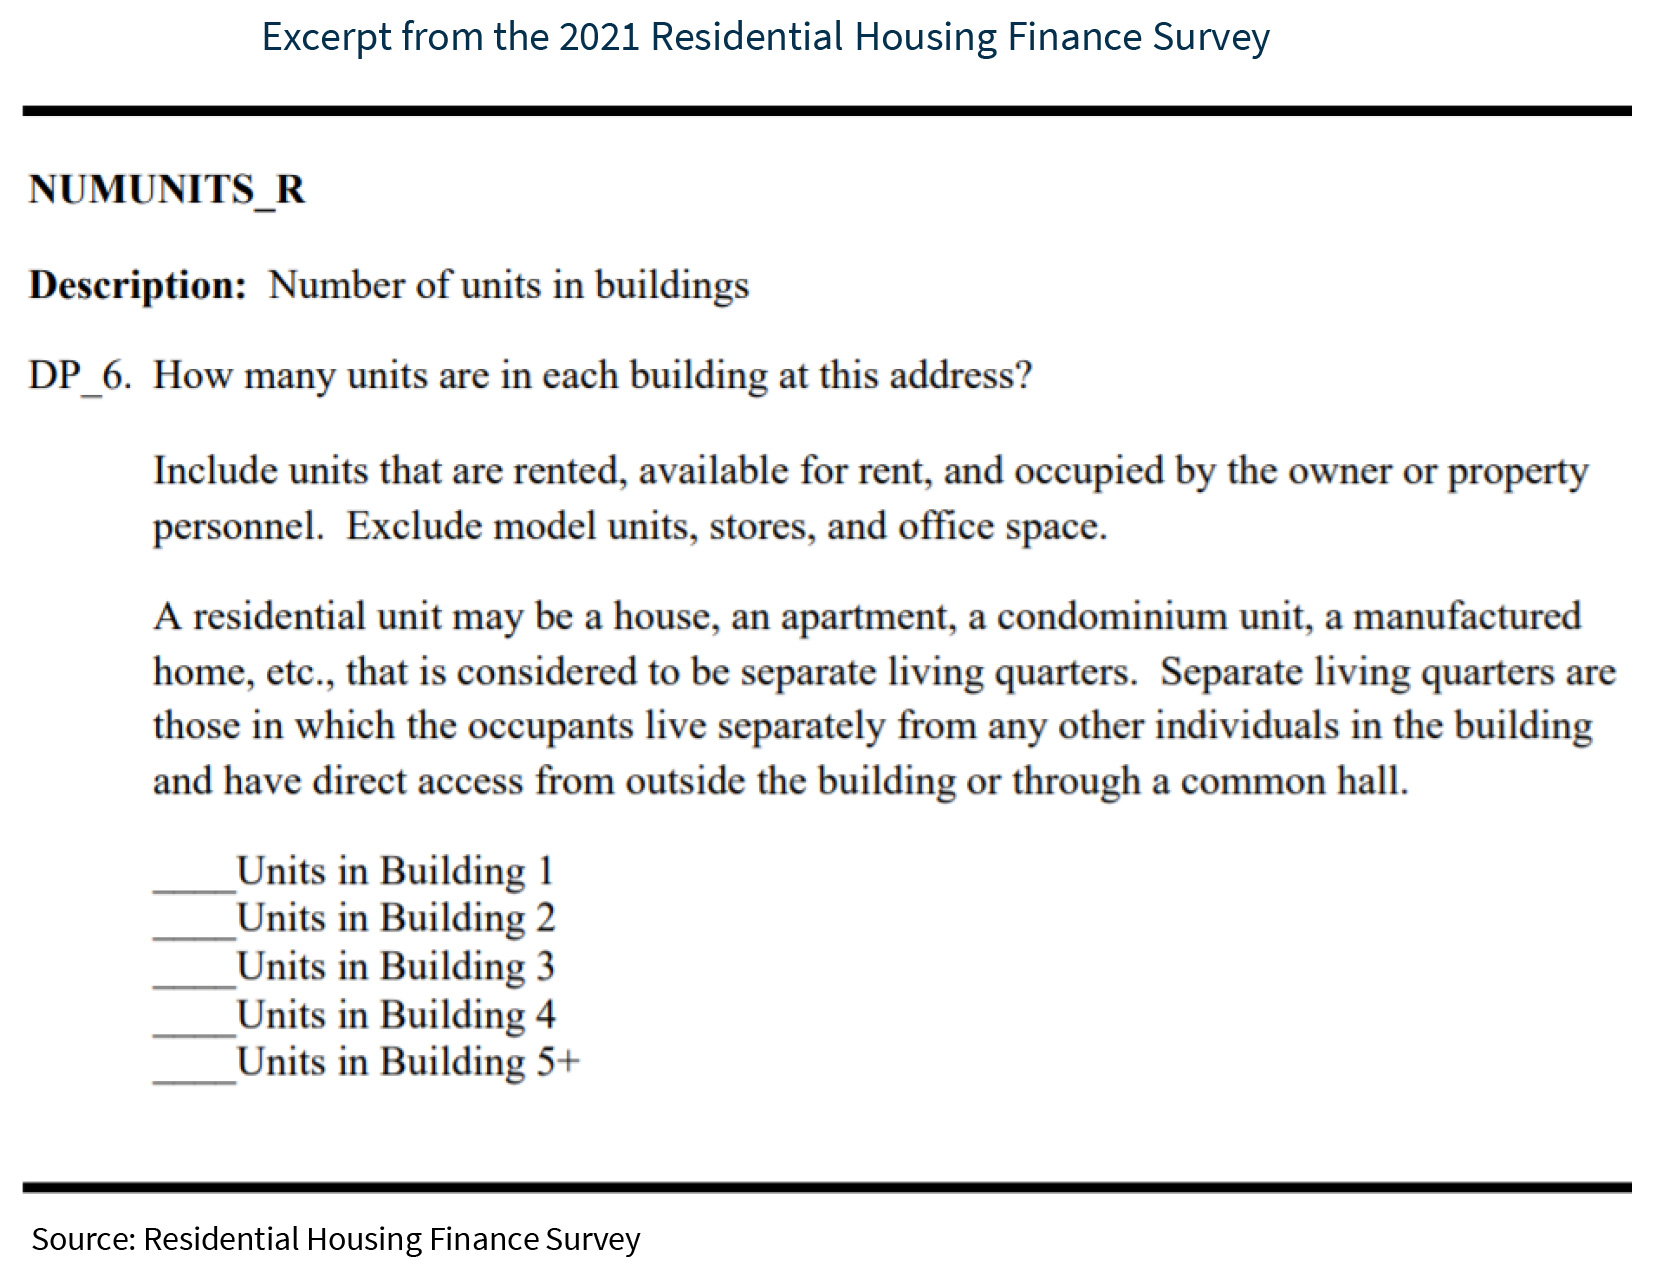 Excerpt from the 2021 Residential Housing Finance Survey